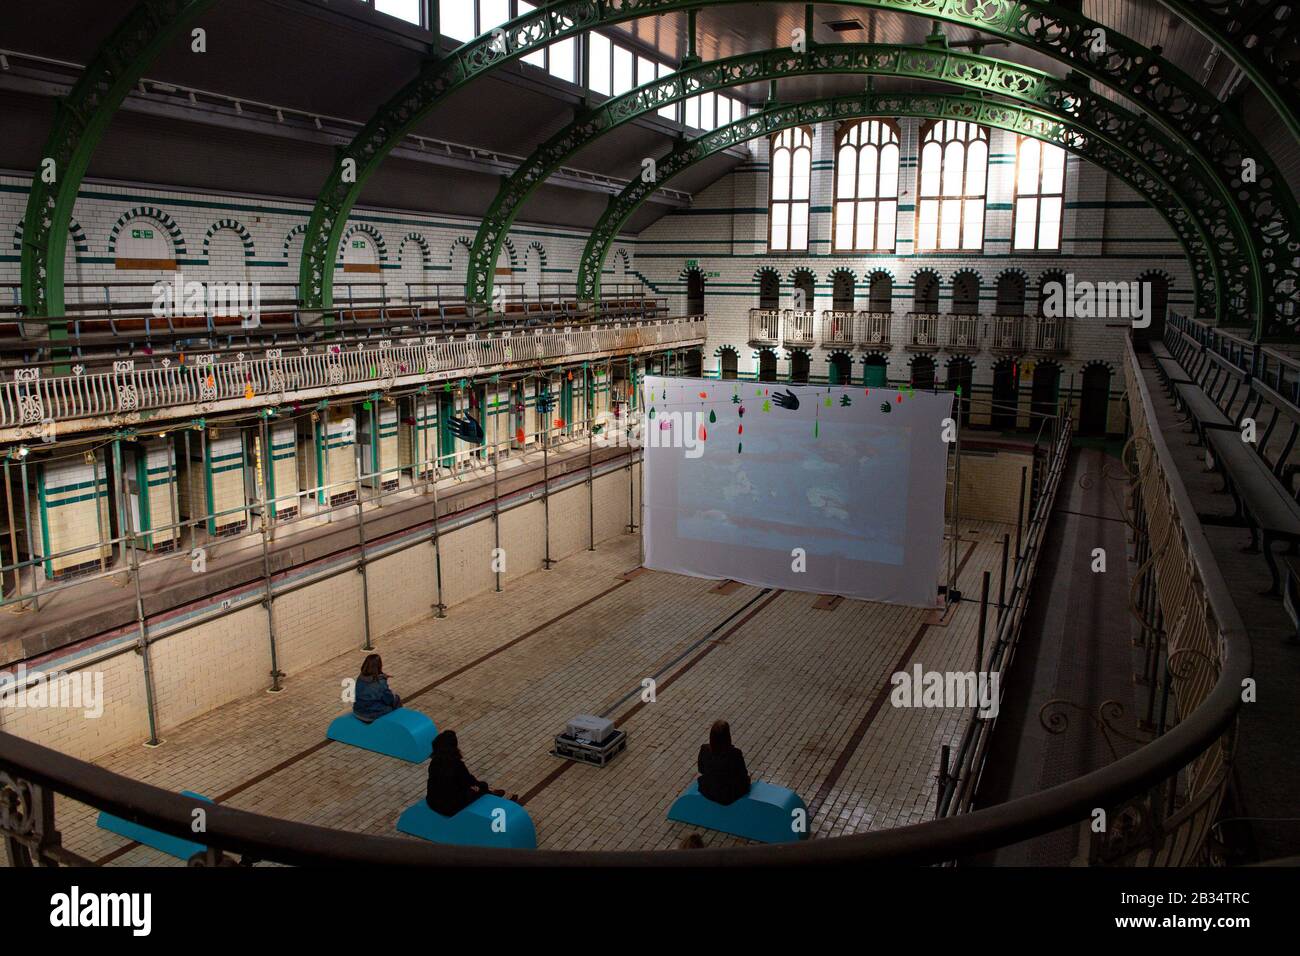 Members of the public view Specular Reflecular art installation at Moseley Road Baths, Birmingham, which features hand-painted animations created by 500 local people in conjunction with the National Trust. Stock Photo